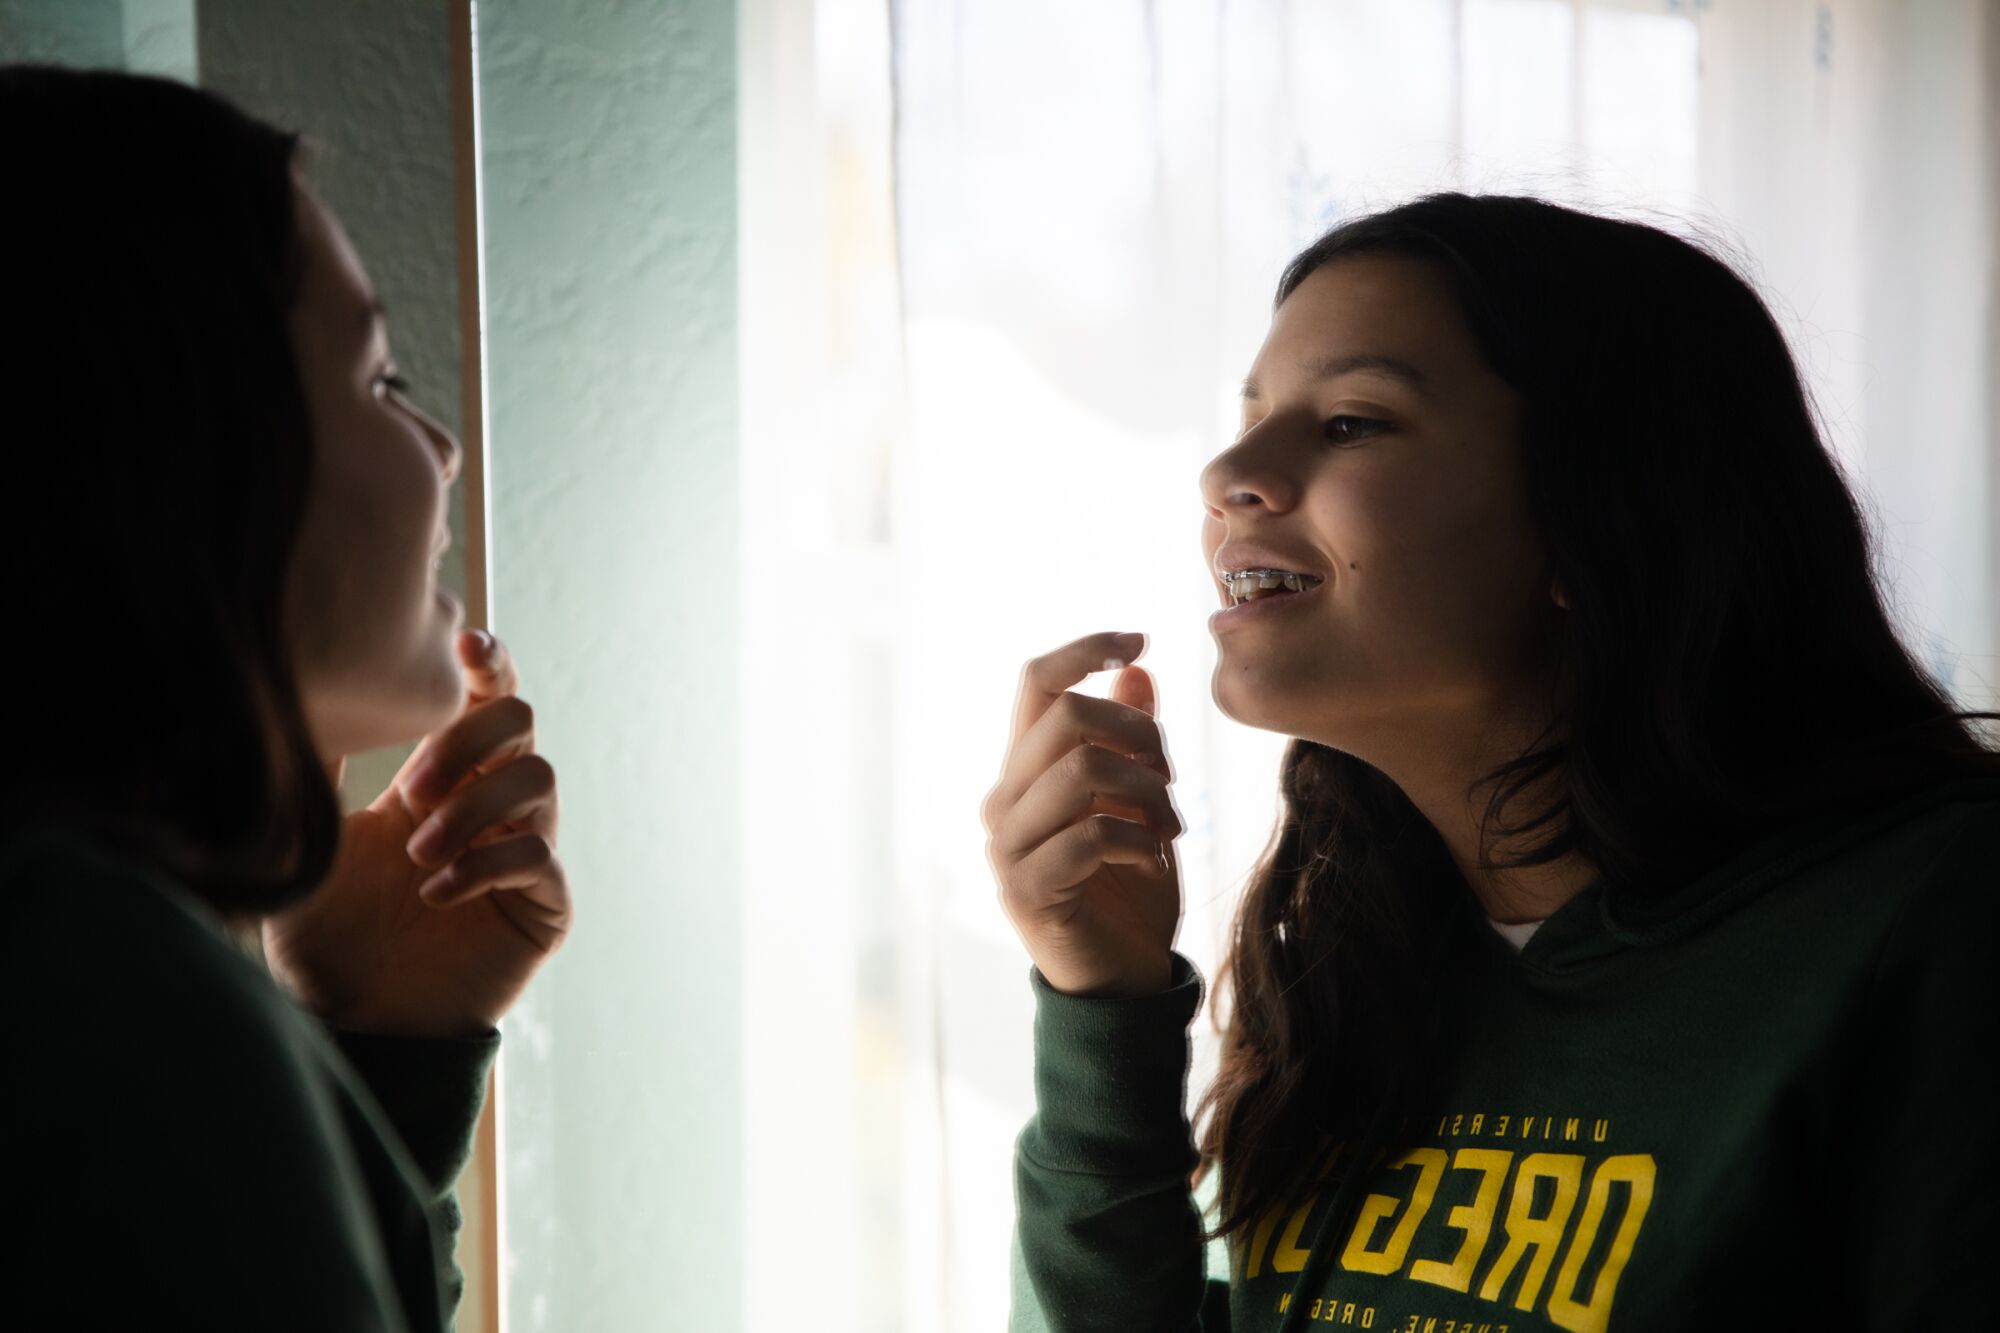 Vishaala Wilkinson looks into a mirror to help attach bands to her braces.